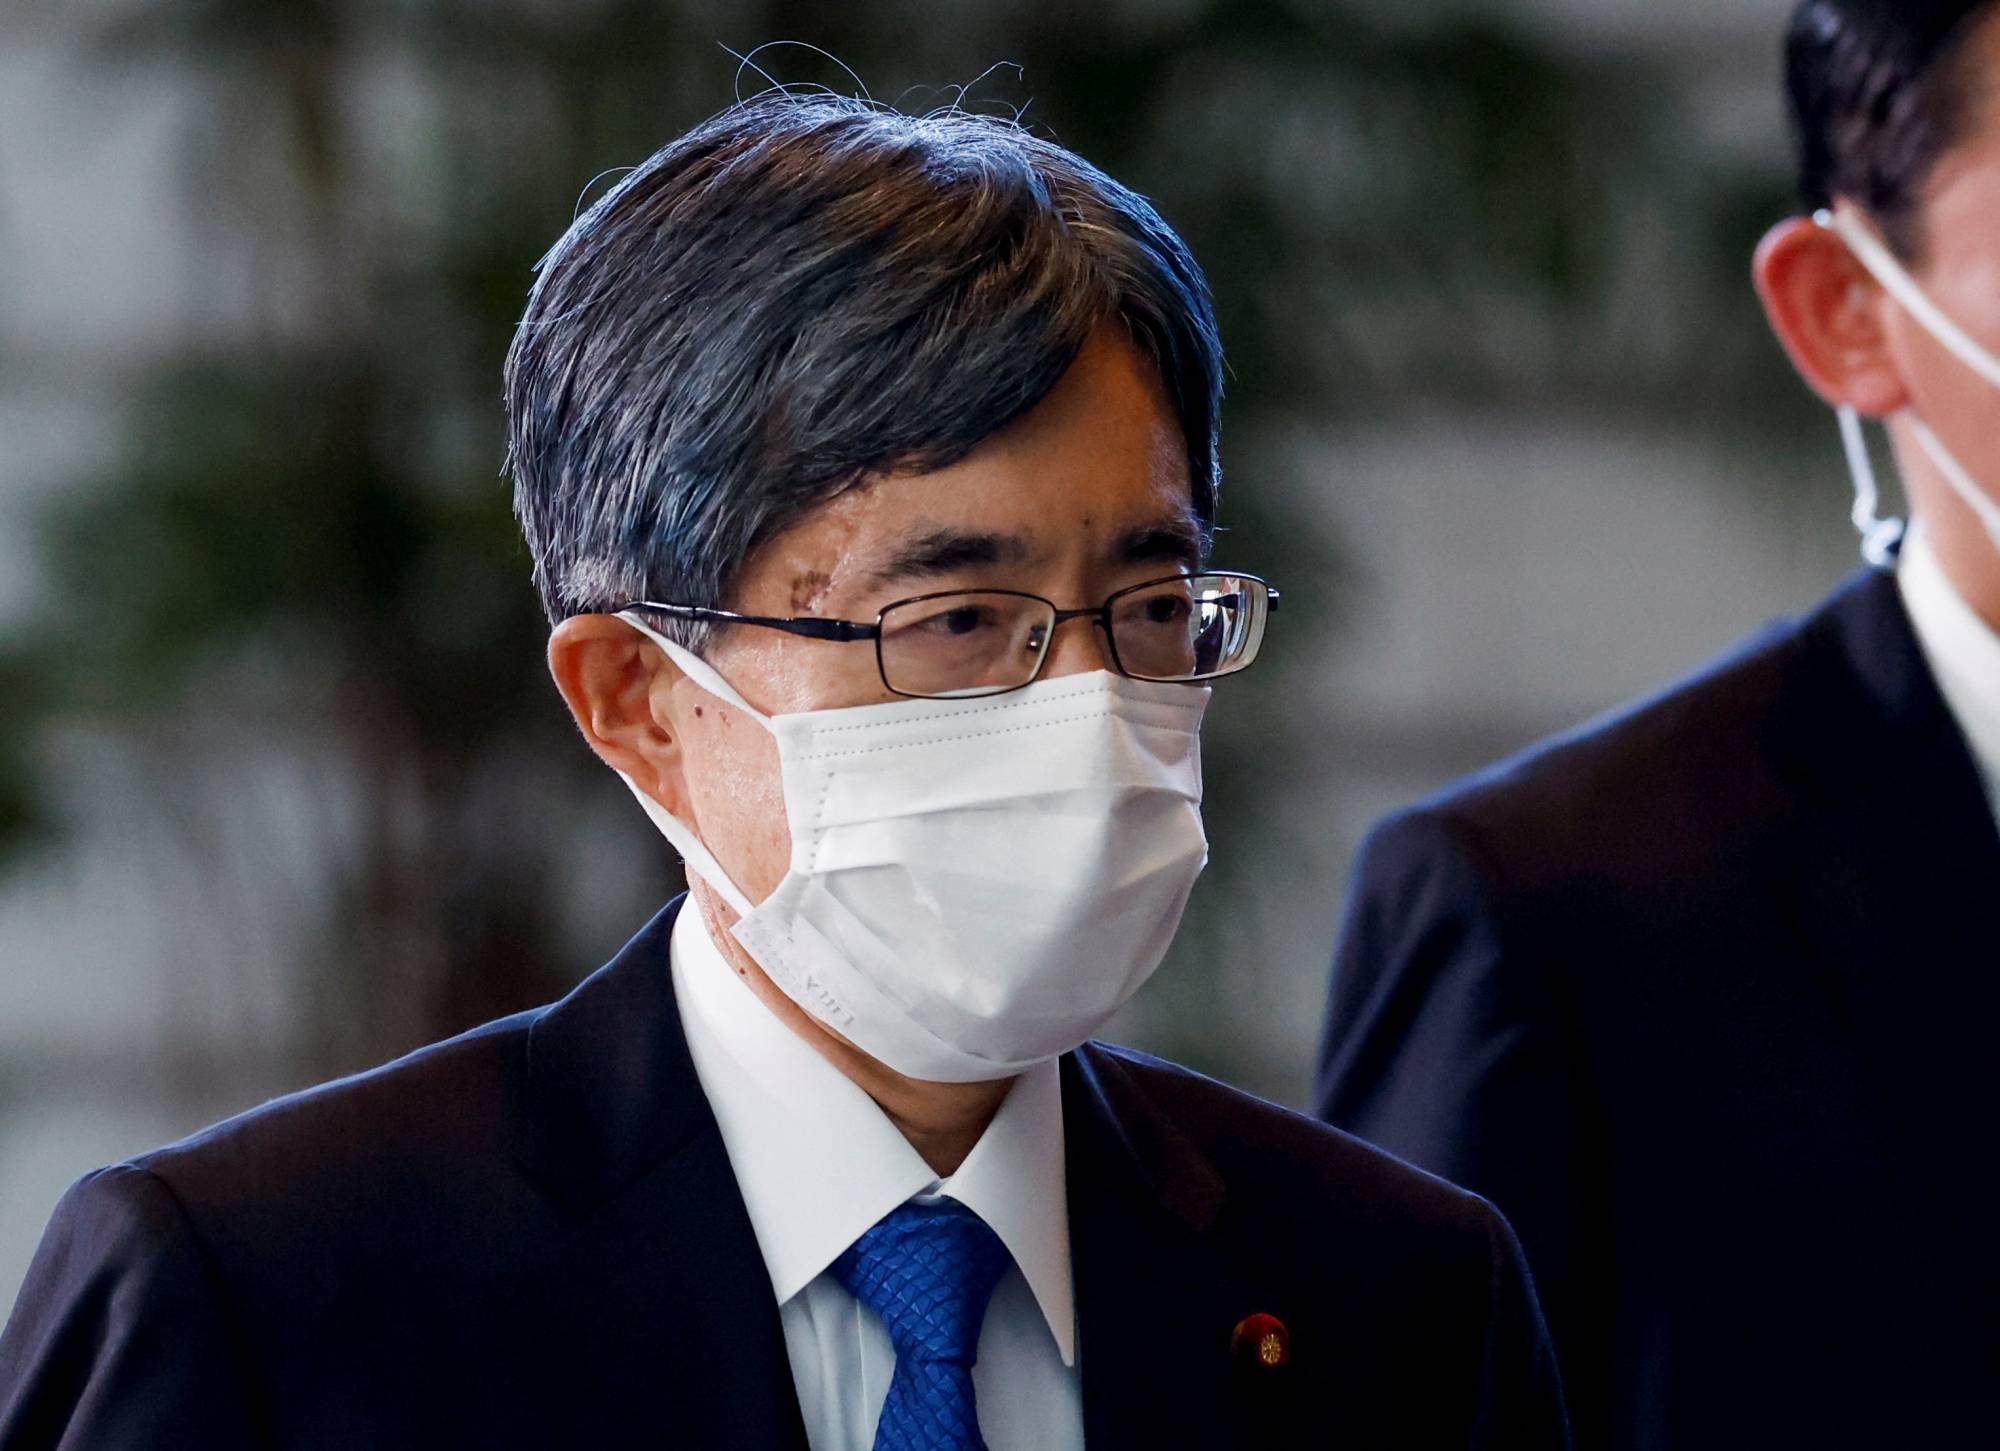 Before his resignation Sunday, internal affairs minister Minoru Terada was the focus of a string of funding-related scandals that called his credibility into question. | REUTERS